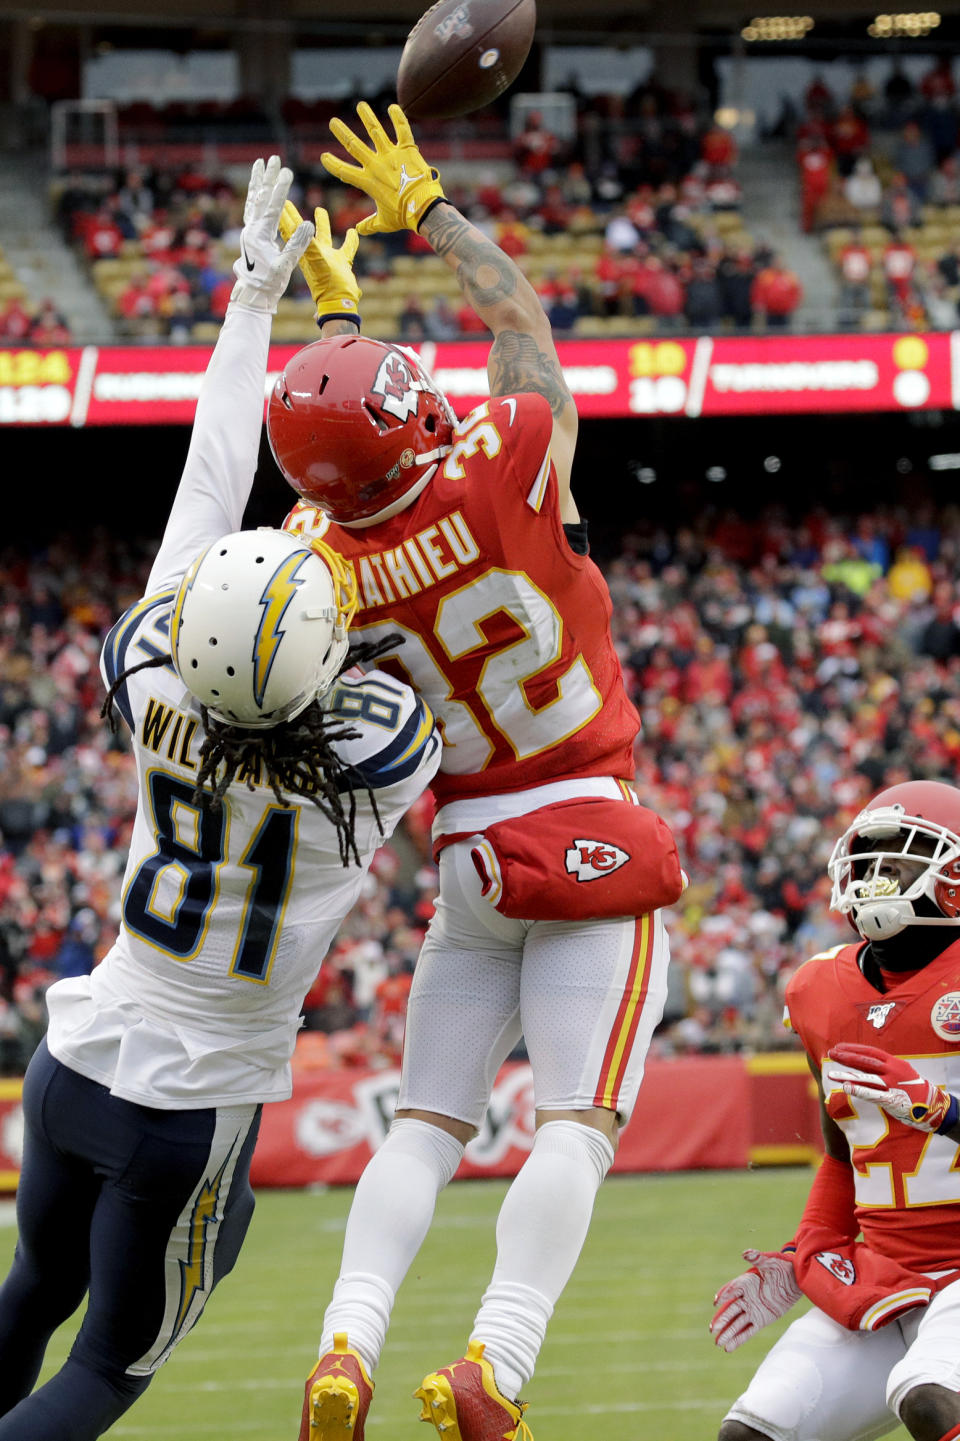 Kansas City Chiefs safety Tyrann Mathieu (32) intercepts a pass intended for Los Angeles Chargers wide receiver Mike Williams (81), as cornerback Rashad Fenton (27) watches, during the first half of an NFL football game in Kansas City, Mo., Sunday, Dec. 29, 2019. (AP Photo/Charlie Riedel)